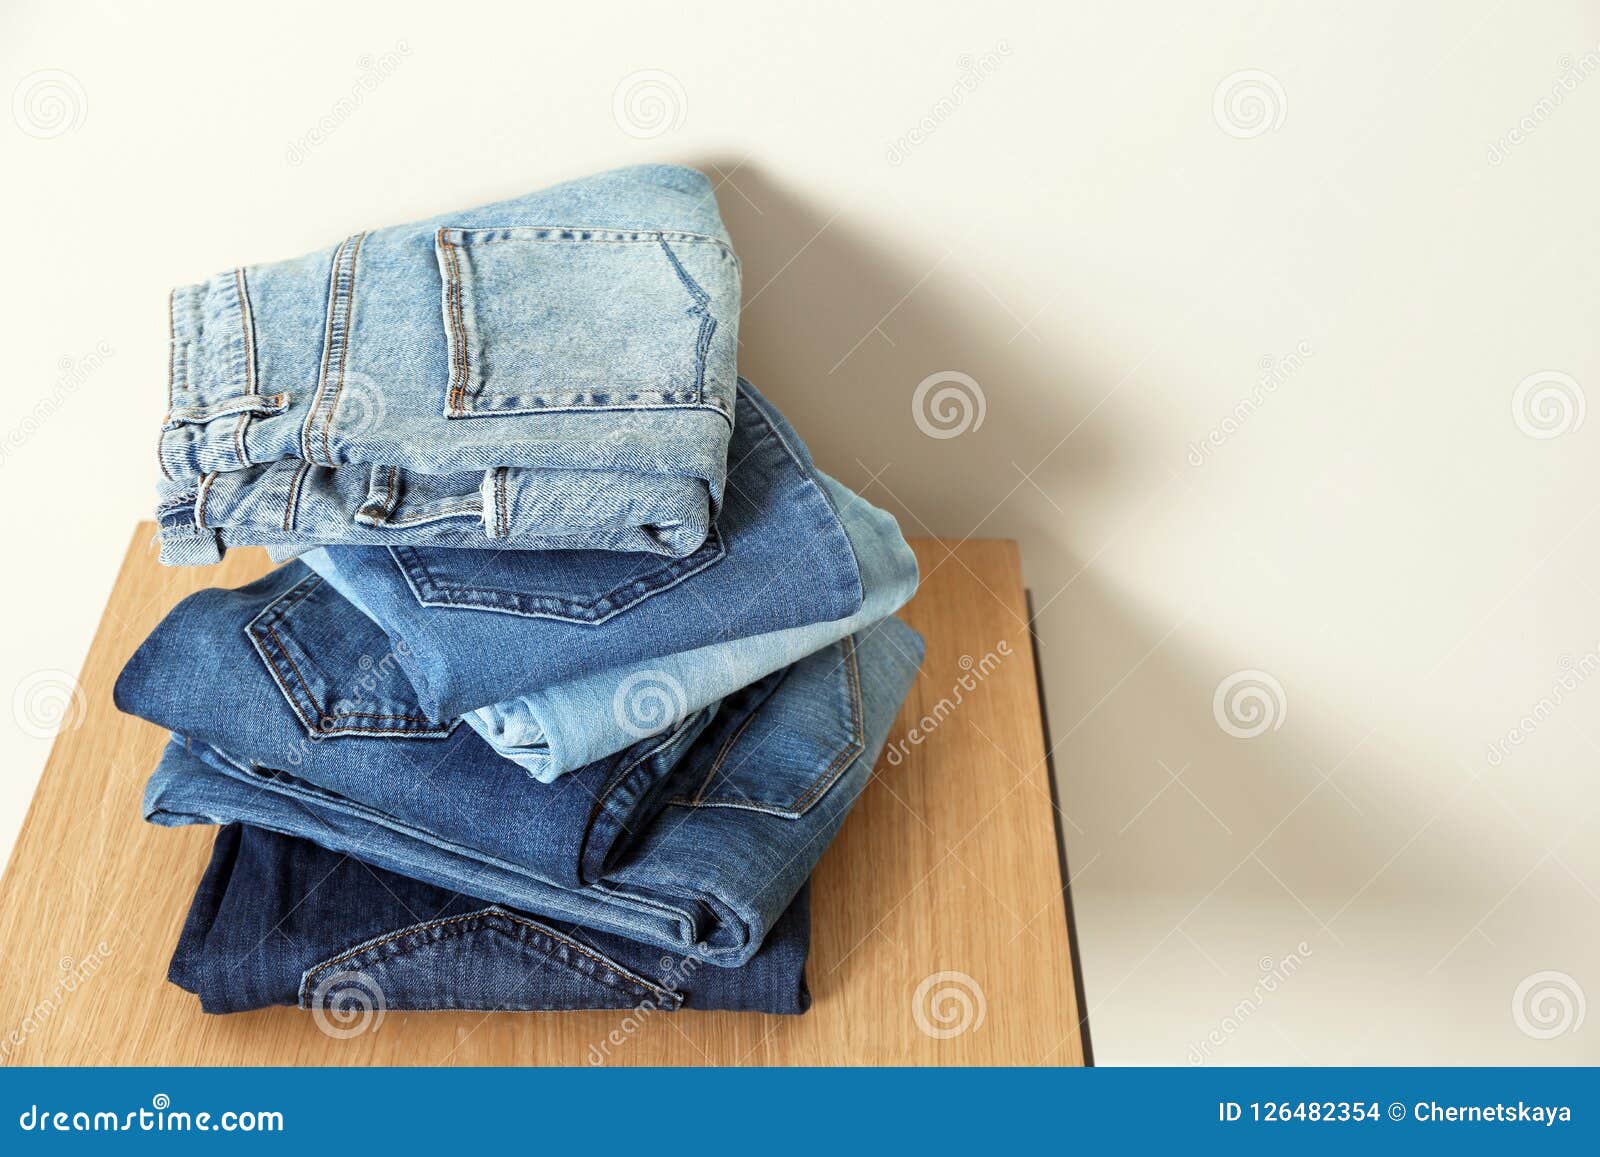 Stack of Different Jeans on Table Against Light Background Stock Photo ...